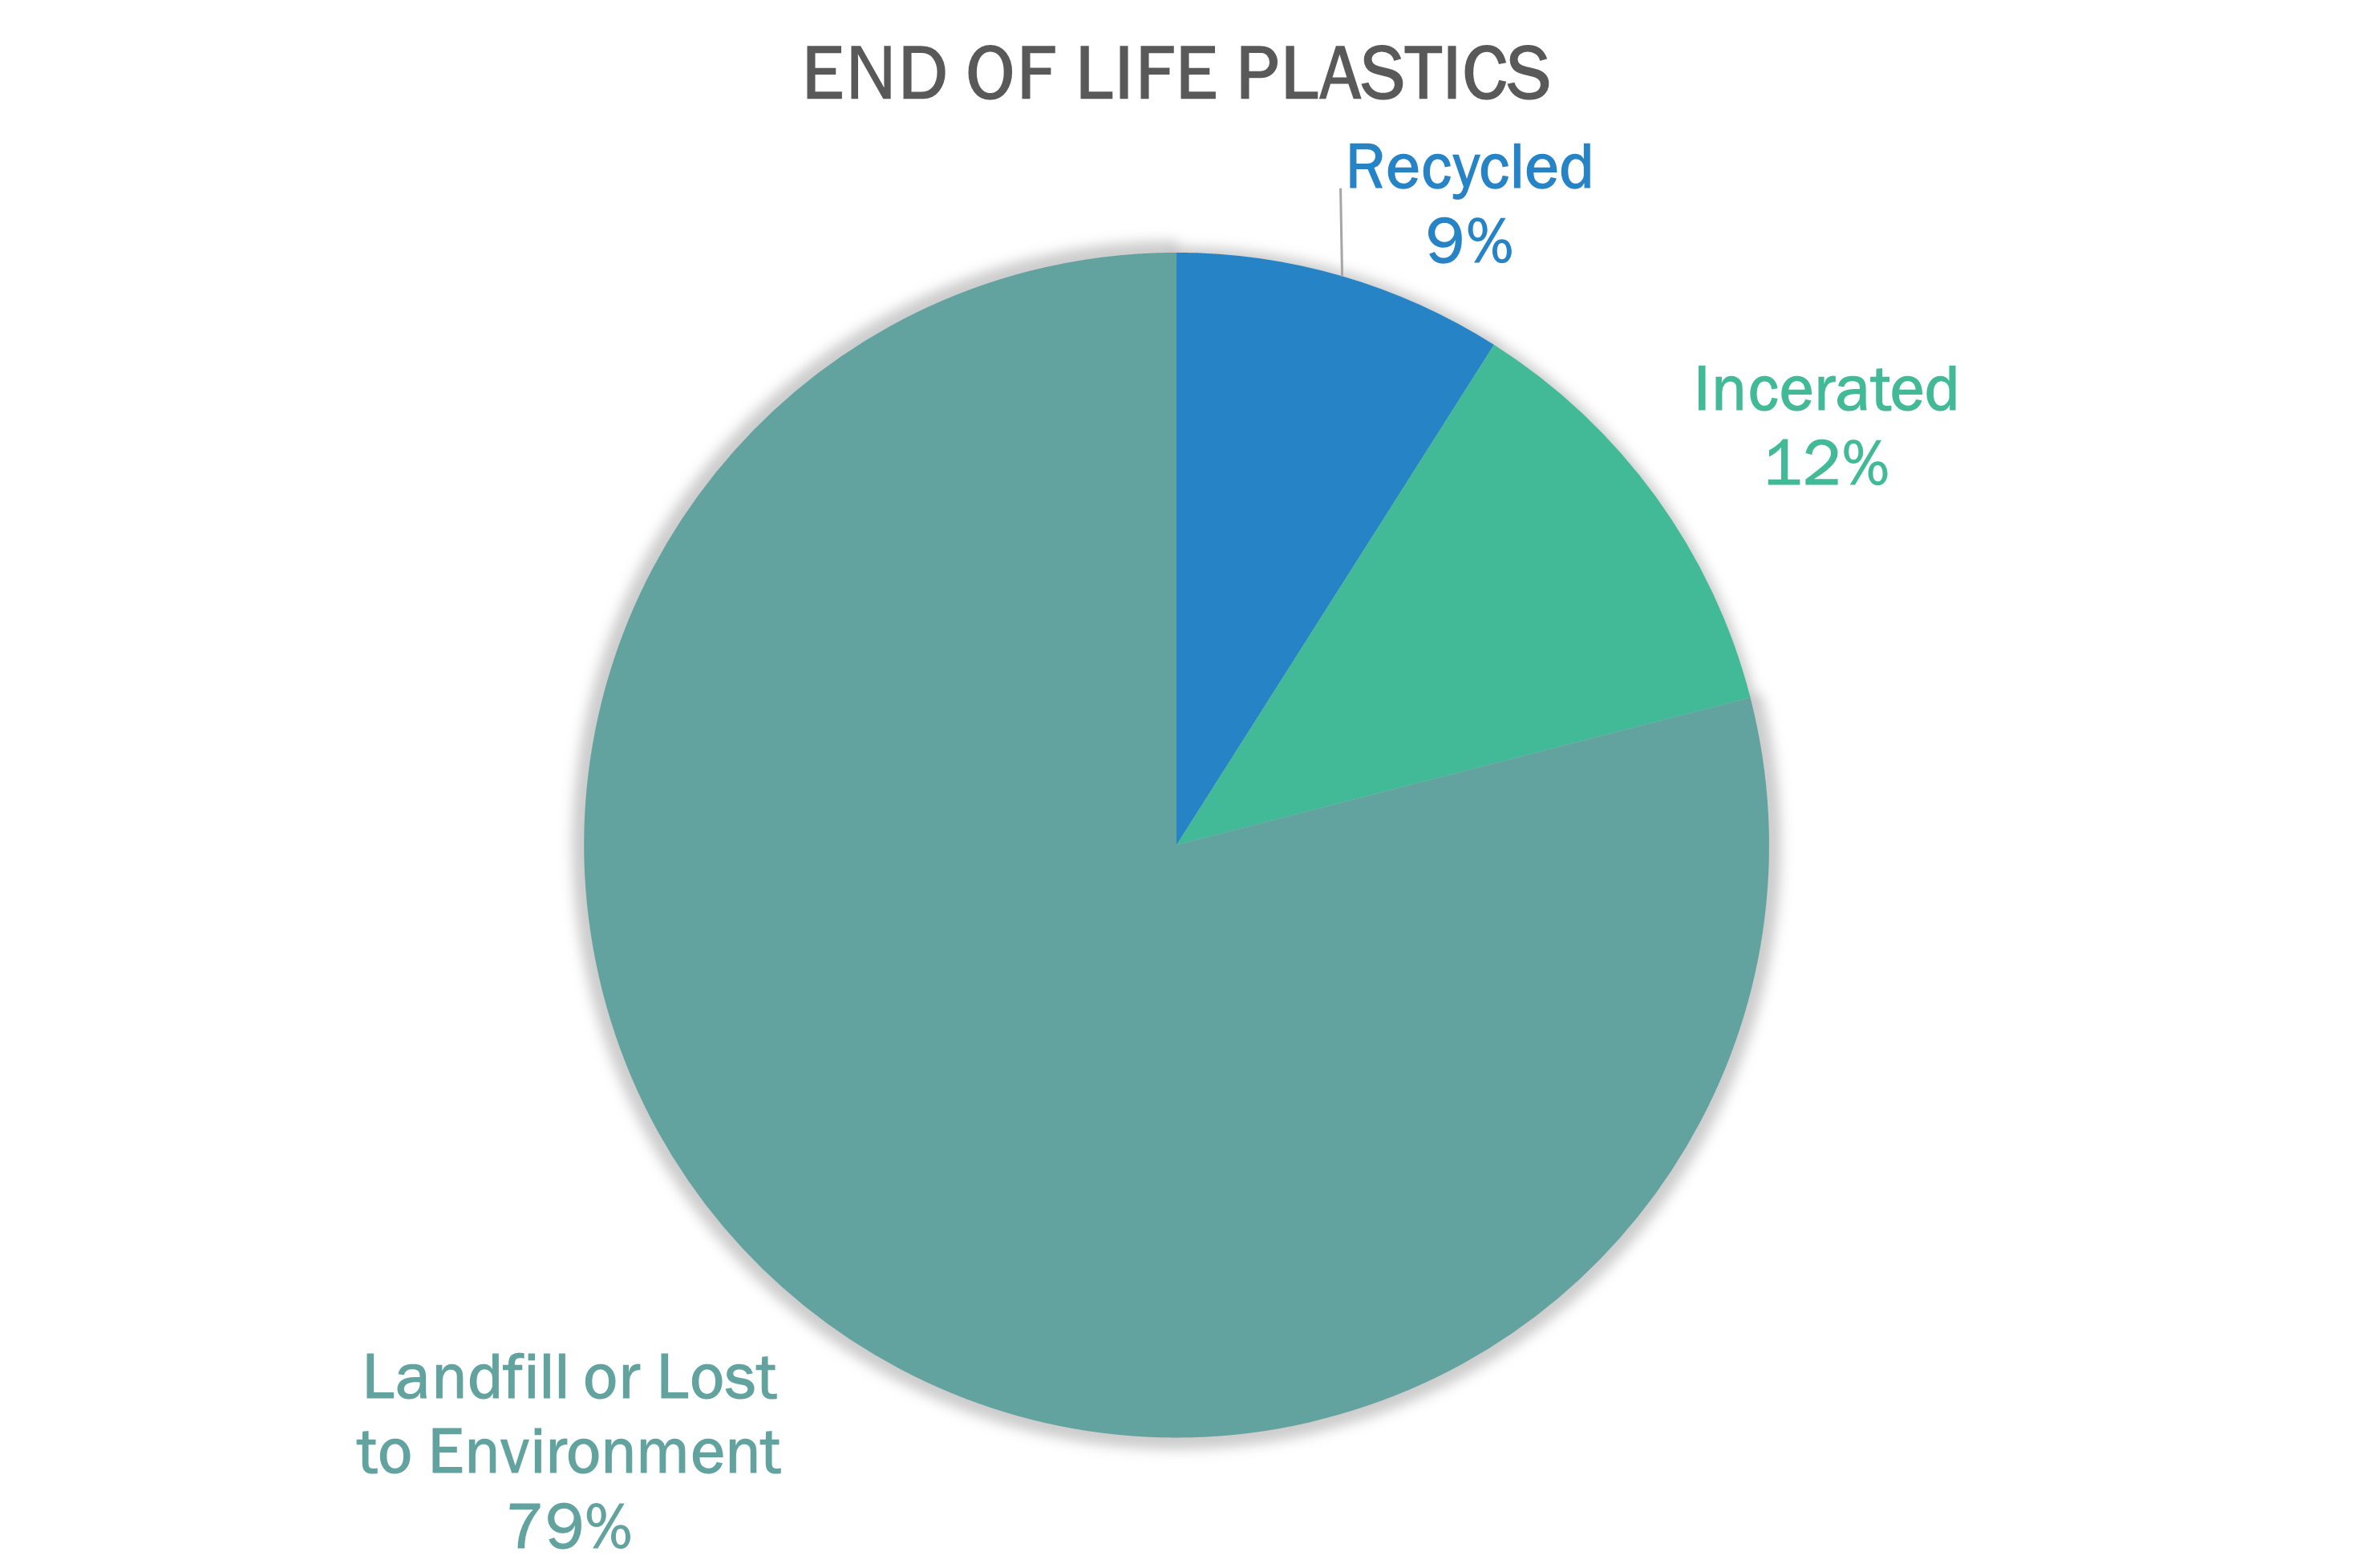 Pie chart showing the end of life of plastics from landfill (79%) to Recycled (9%) to Incinerated (12%)